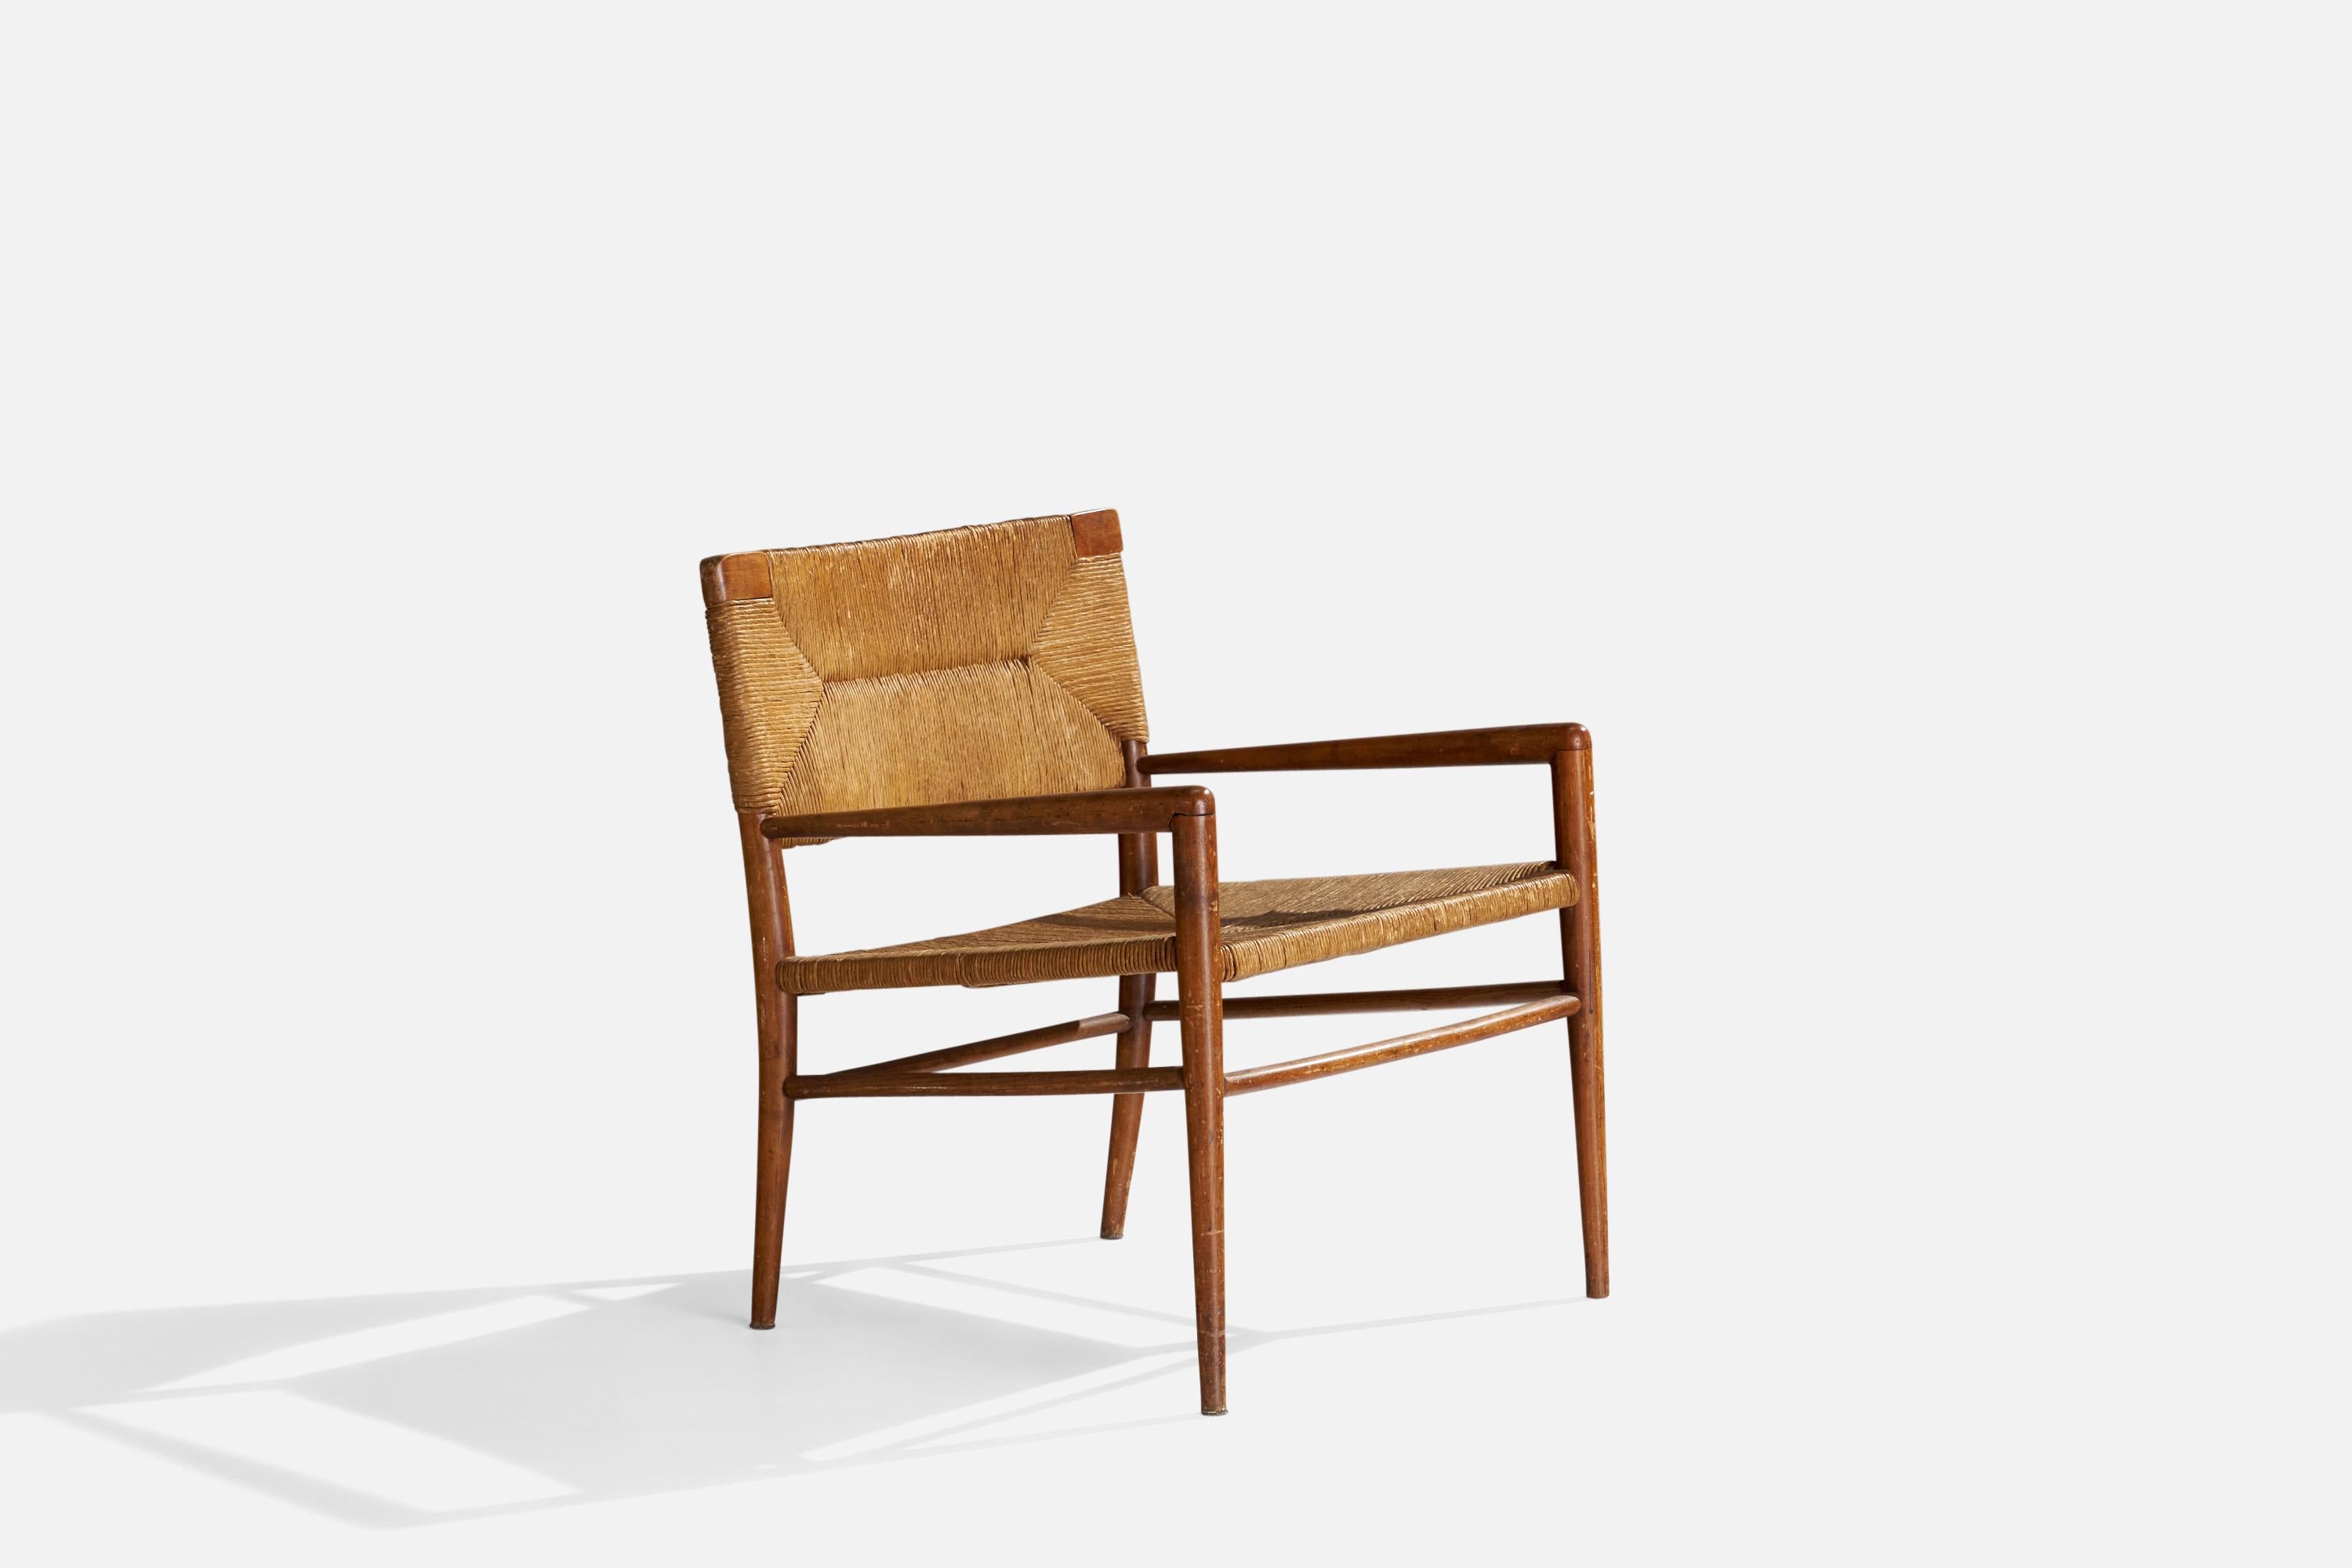 A wood and papercord lounge chair designed by Mel Smilow and produced by Smilow-Thielle, c. 1955.

Seat height 16”.